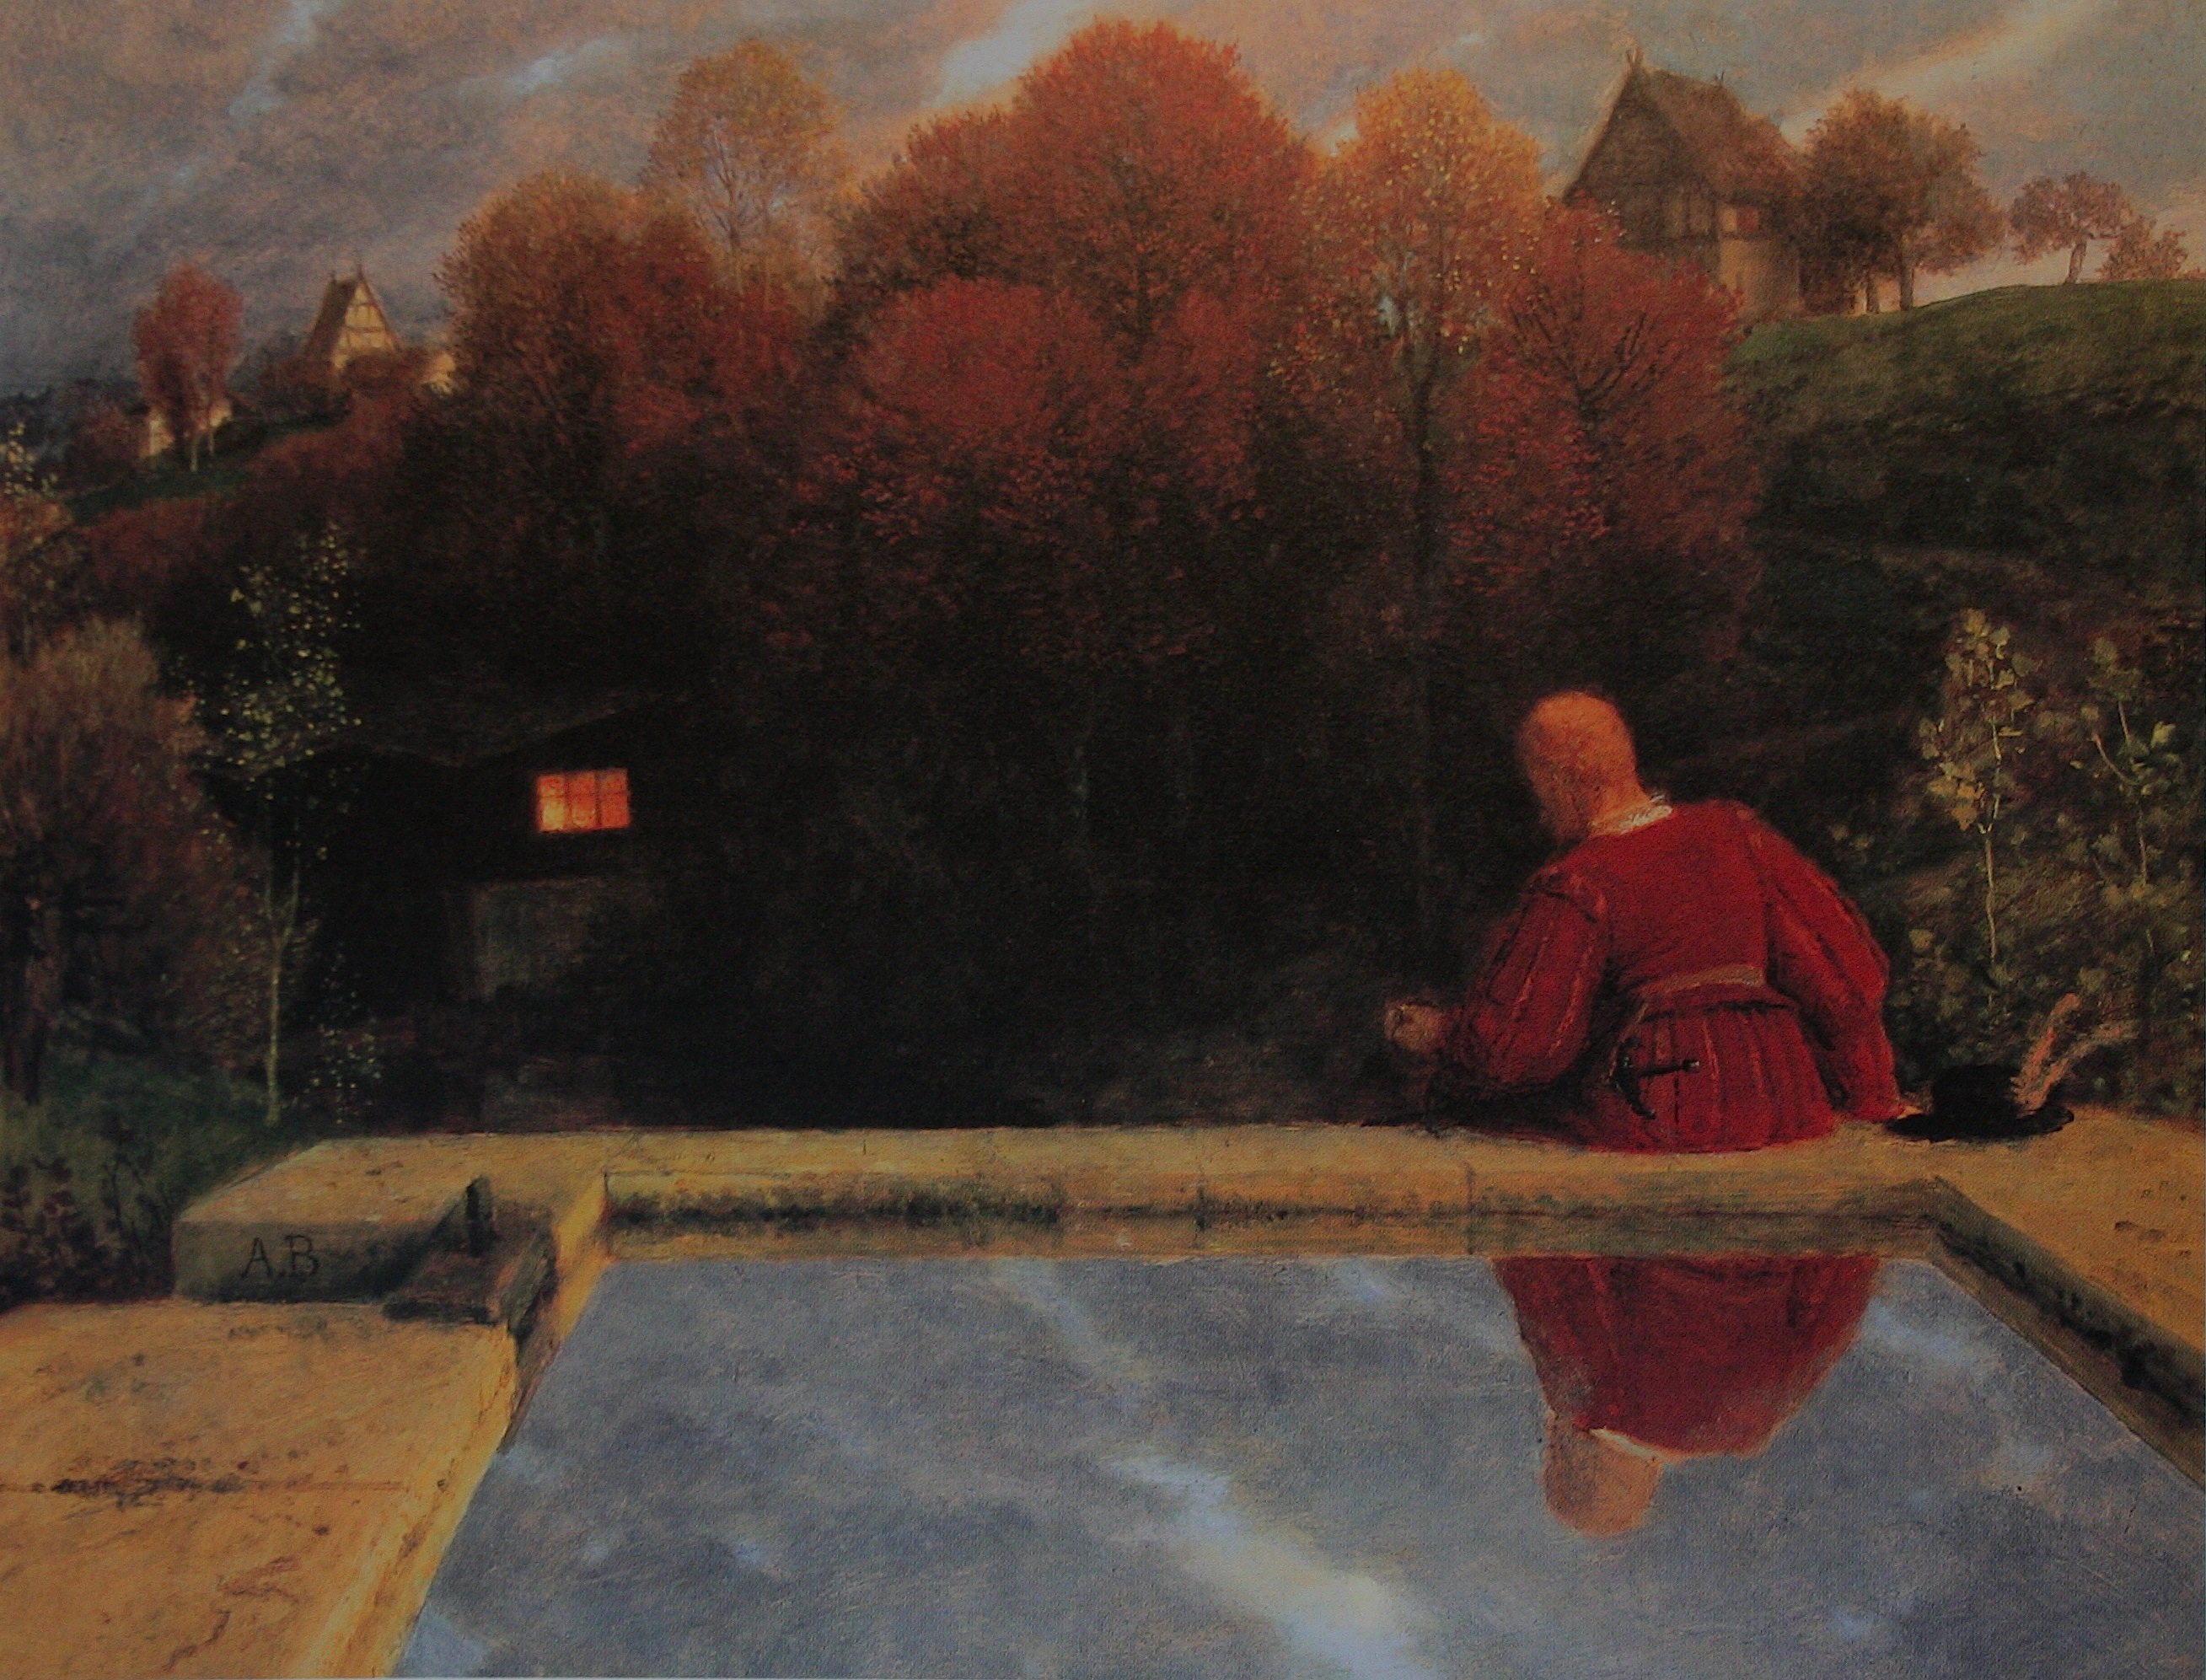 The Homecoming by Arnold Böcklin - 1887 - 78.5 x 100 cm private collection